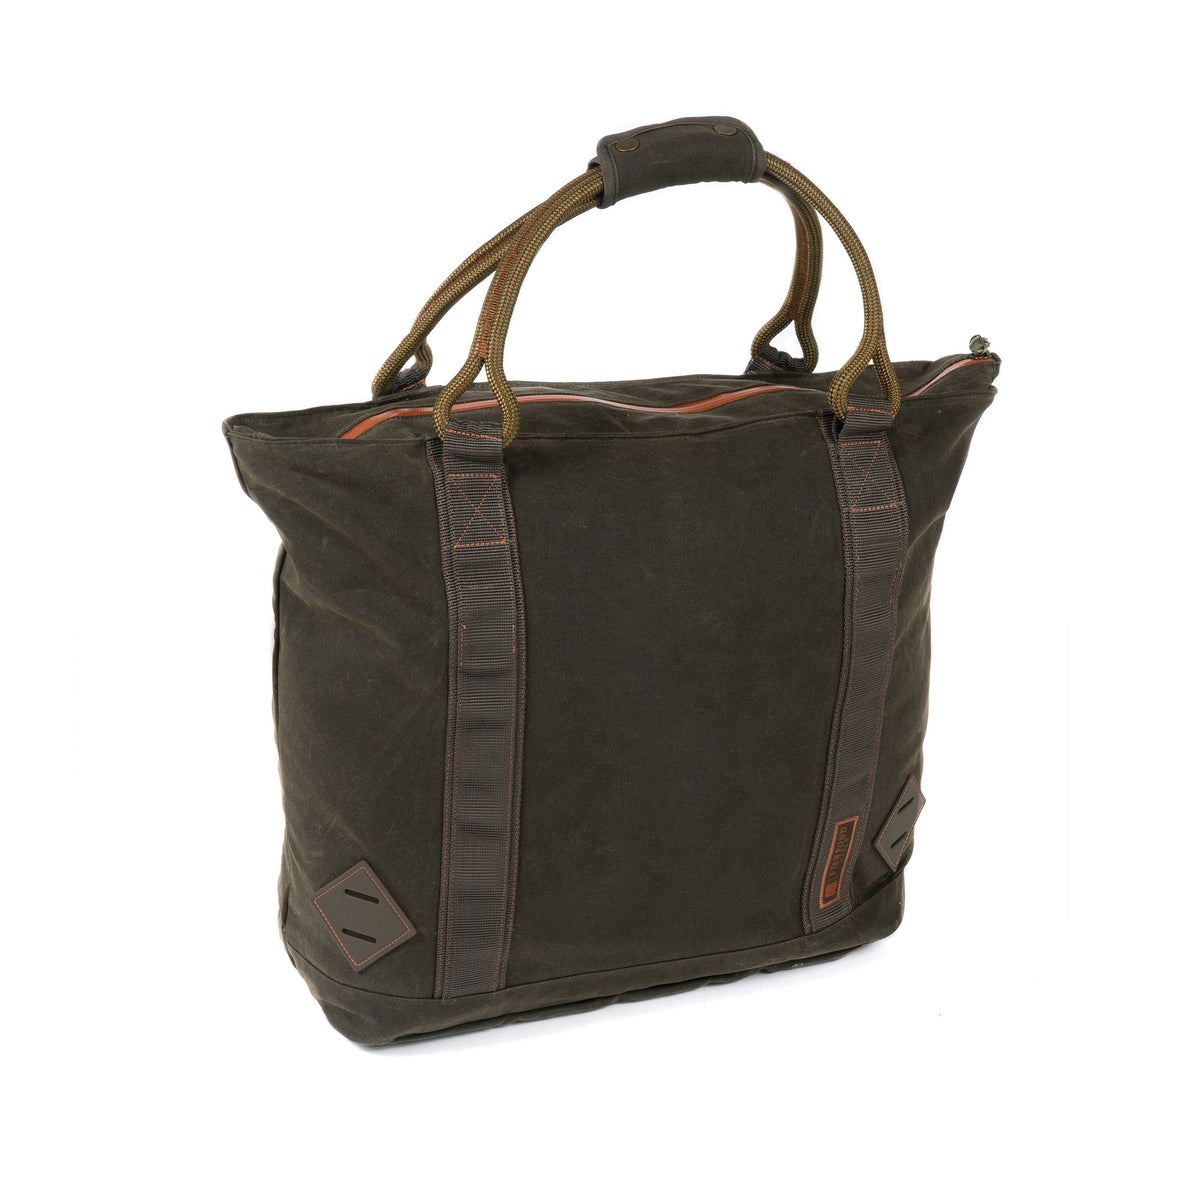 Fishpond - Horse Thief Tote - Peat Moss